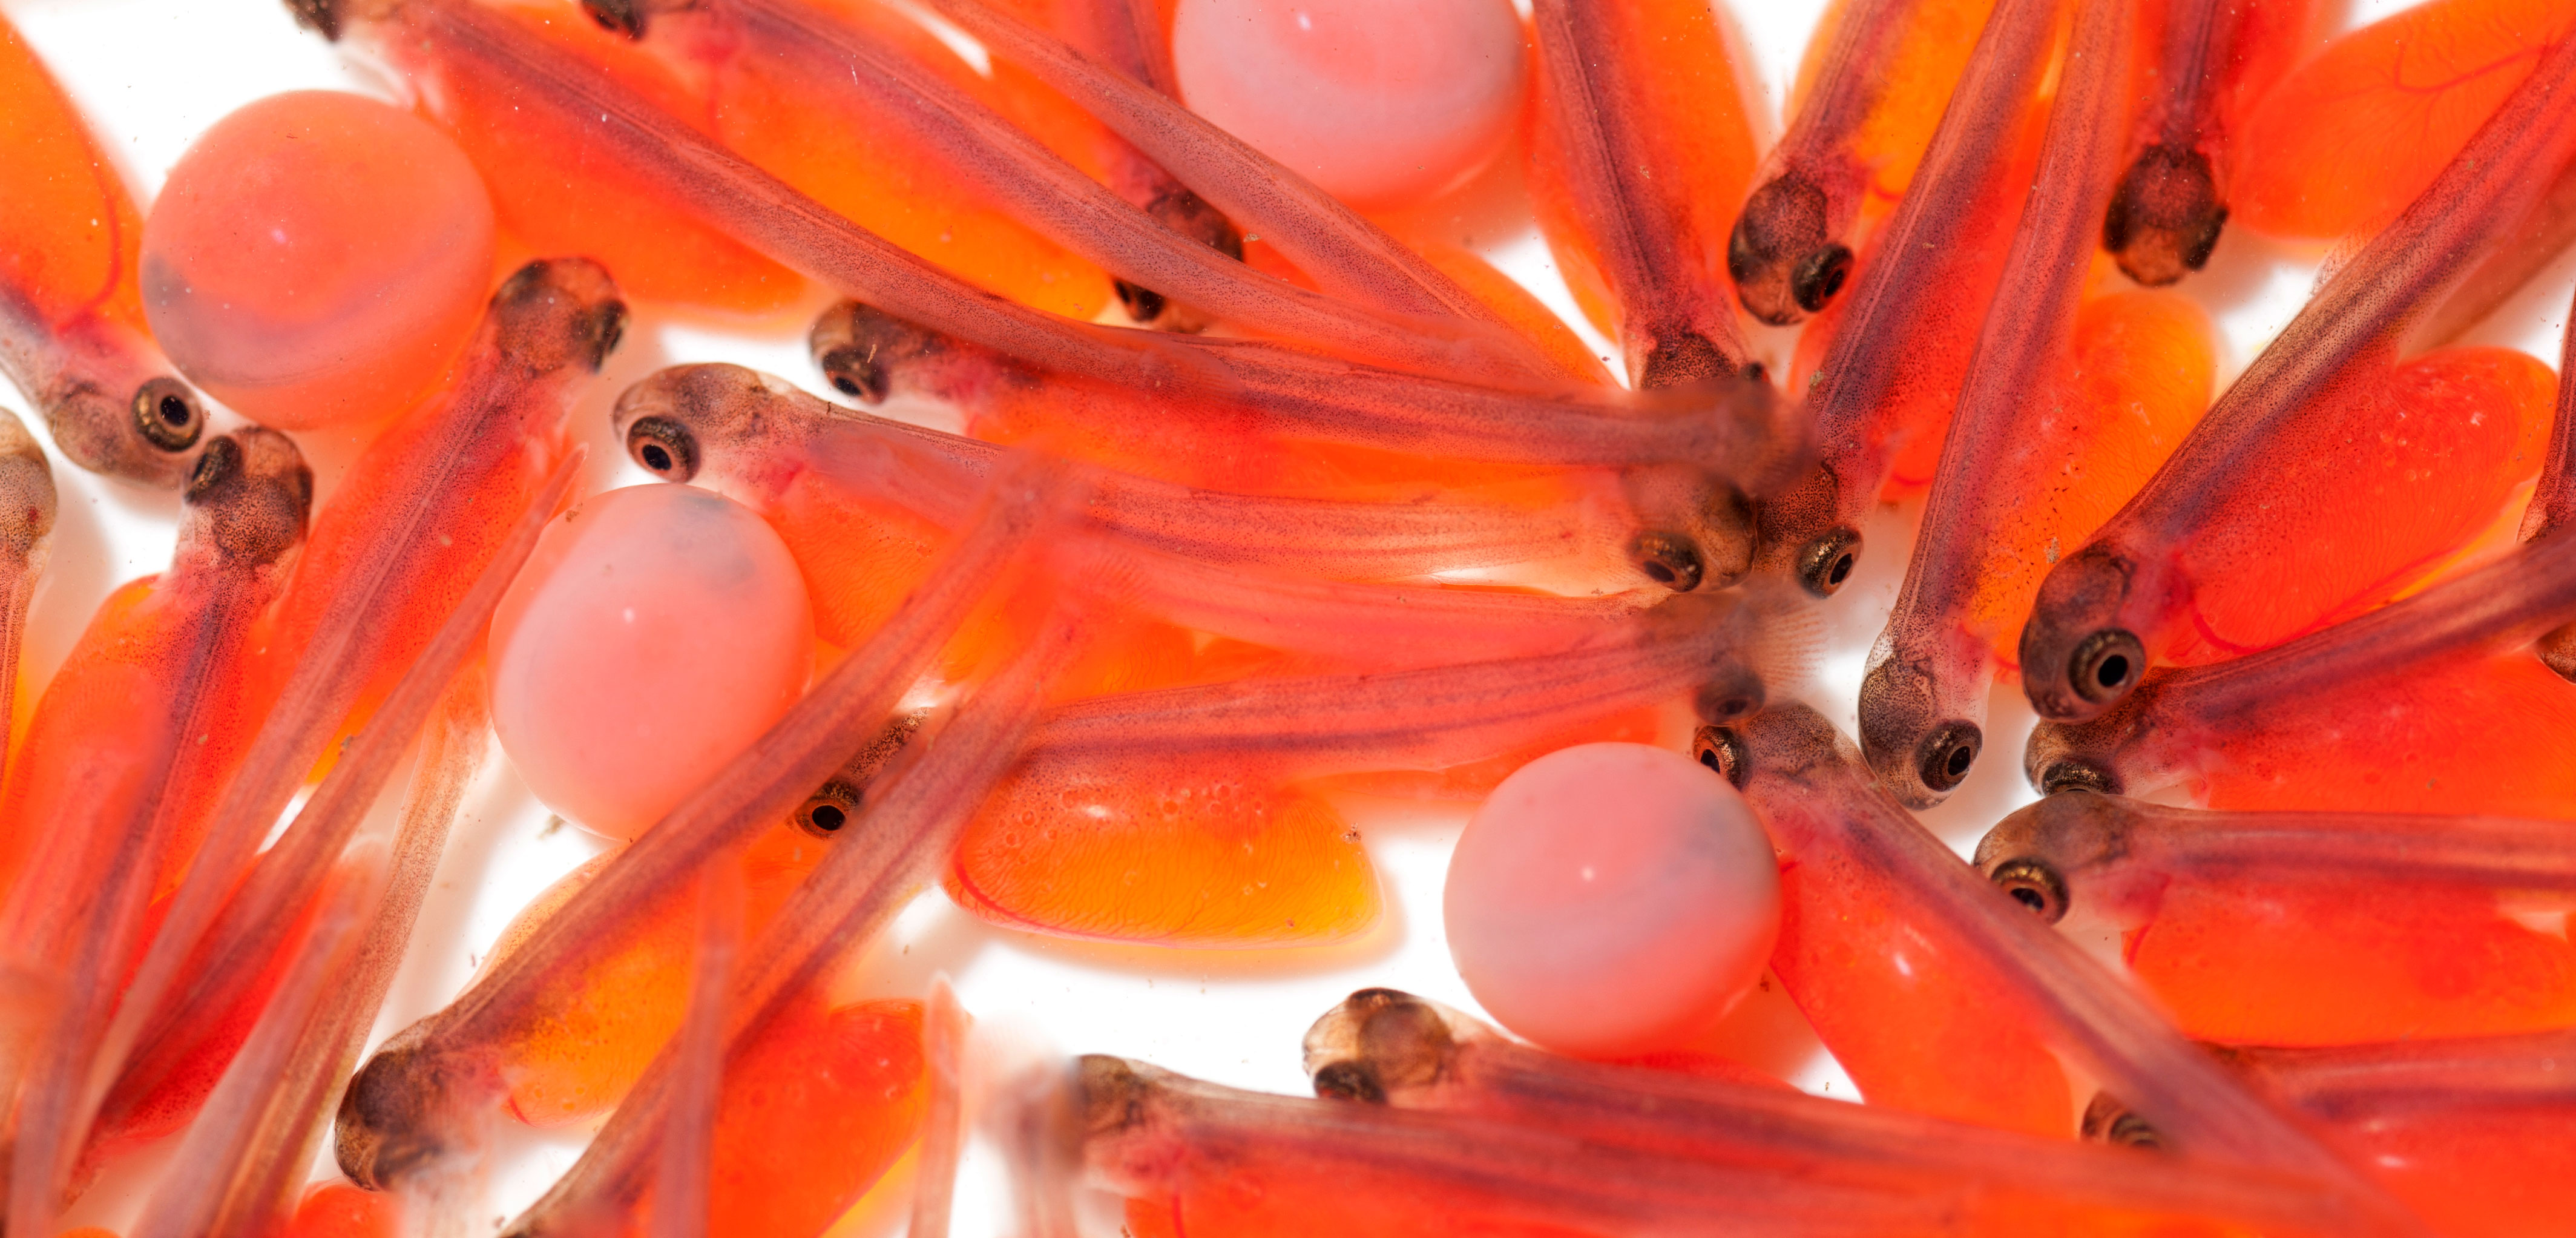 Pink salmon alevins (Oncorhynchus gorbuscha), newly hatched fish with yolk sacs attached